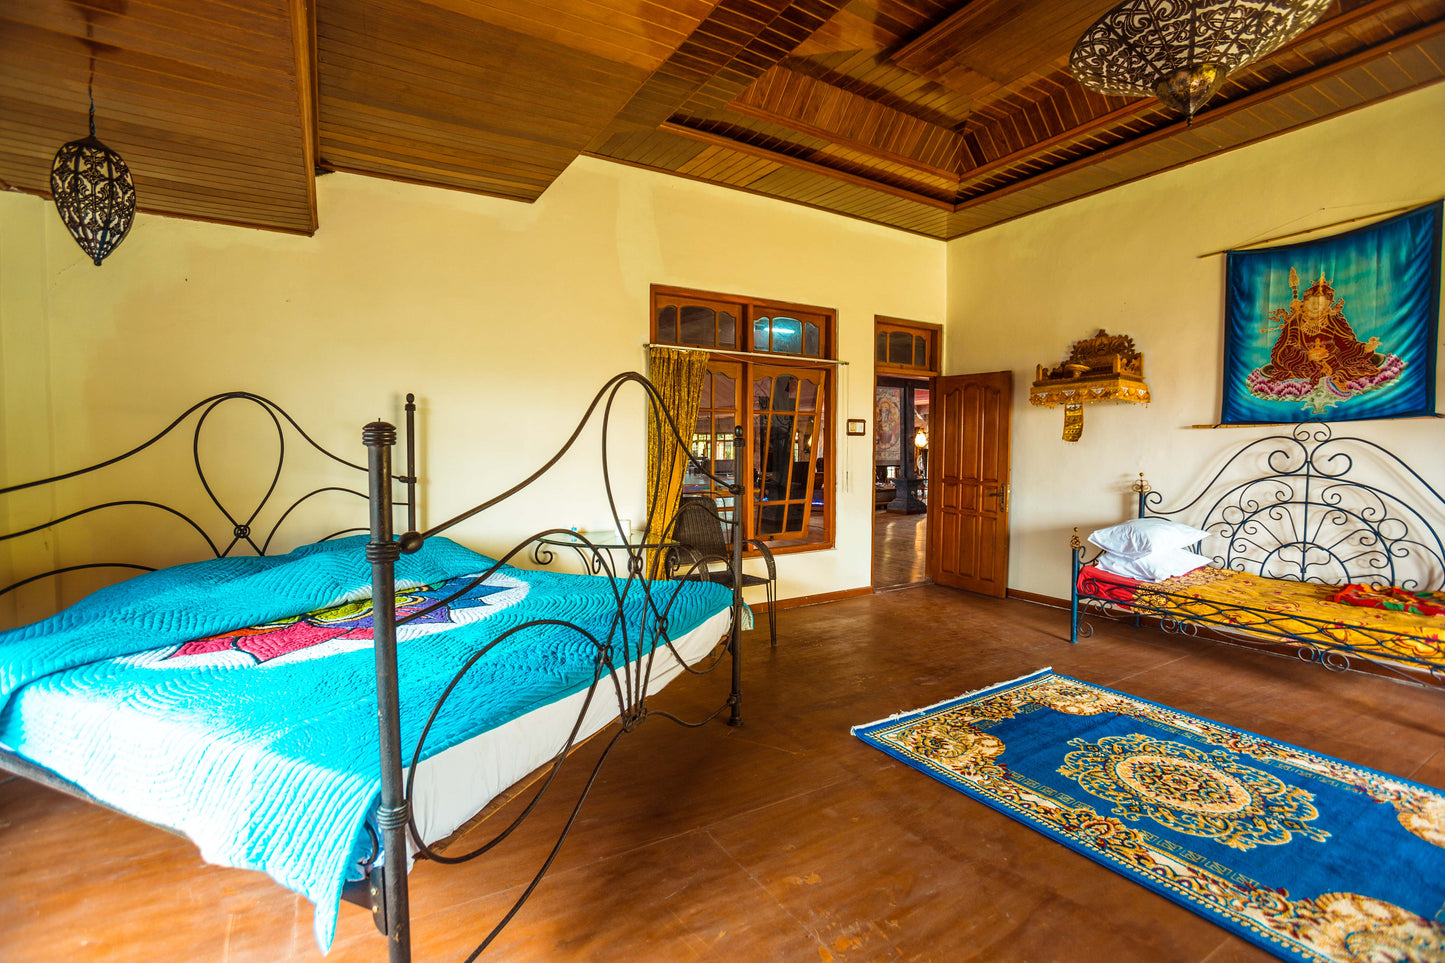 Couples Private bedroom - 2 Person - 1 Week - Bali Flow Temple - Living rooms with Daily Classes